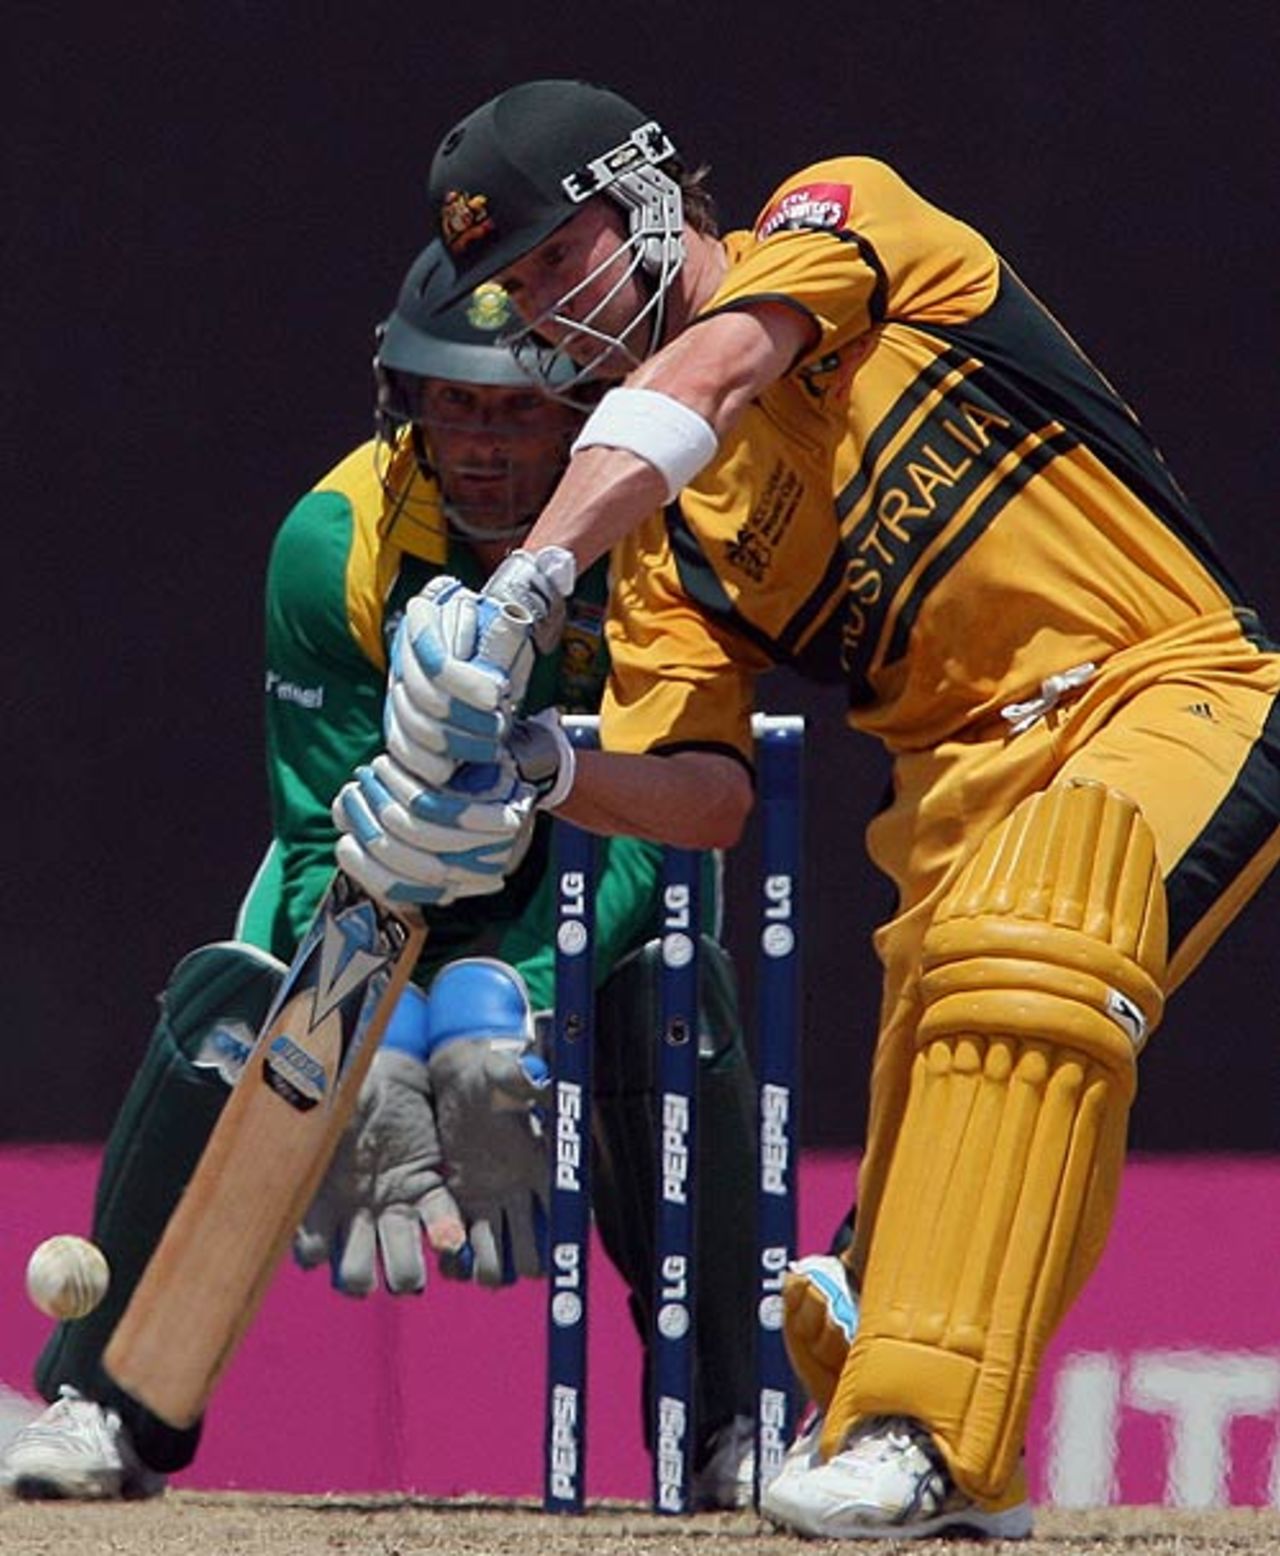 Michael Clarke drives on his way to 92, Australia v South Africa, Group A, St Kitts, March 24, 2007